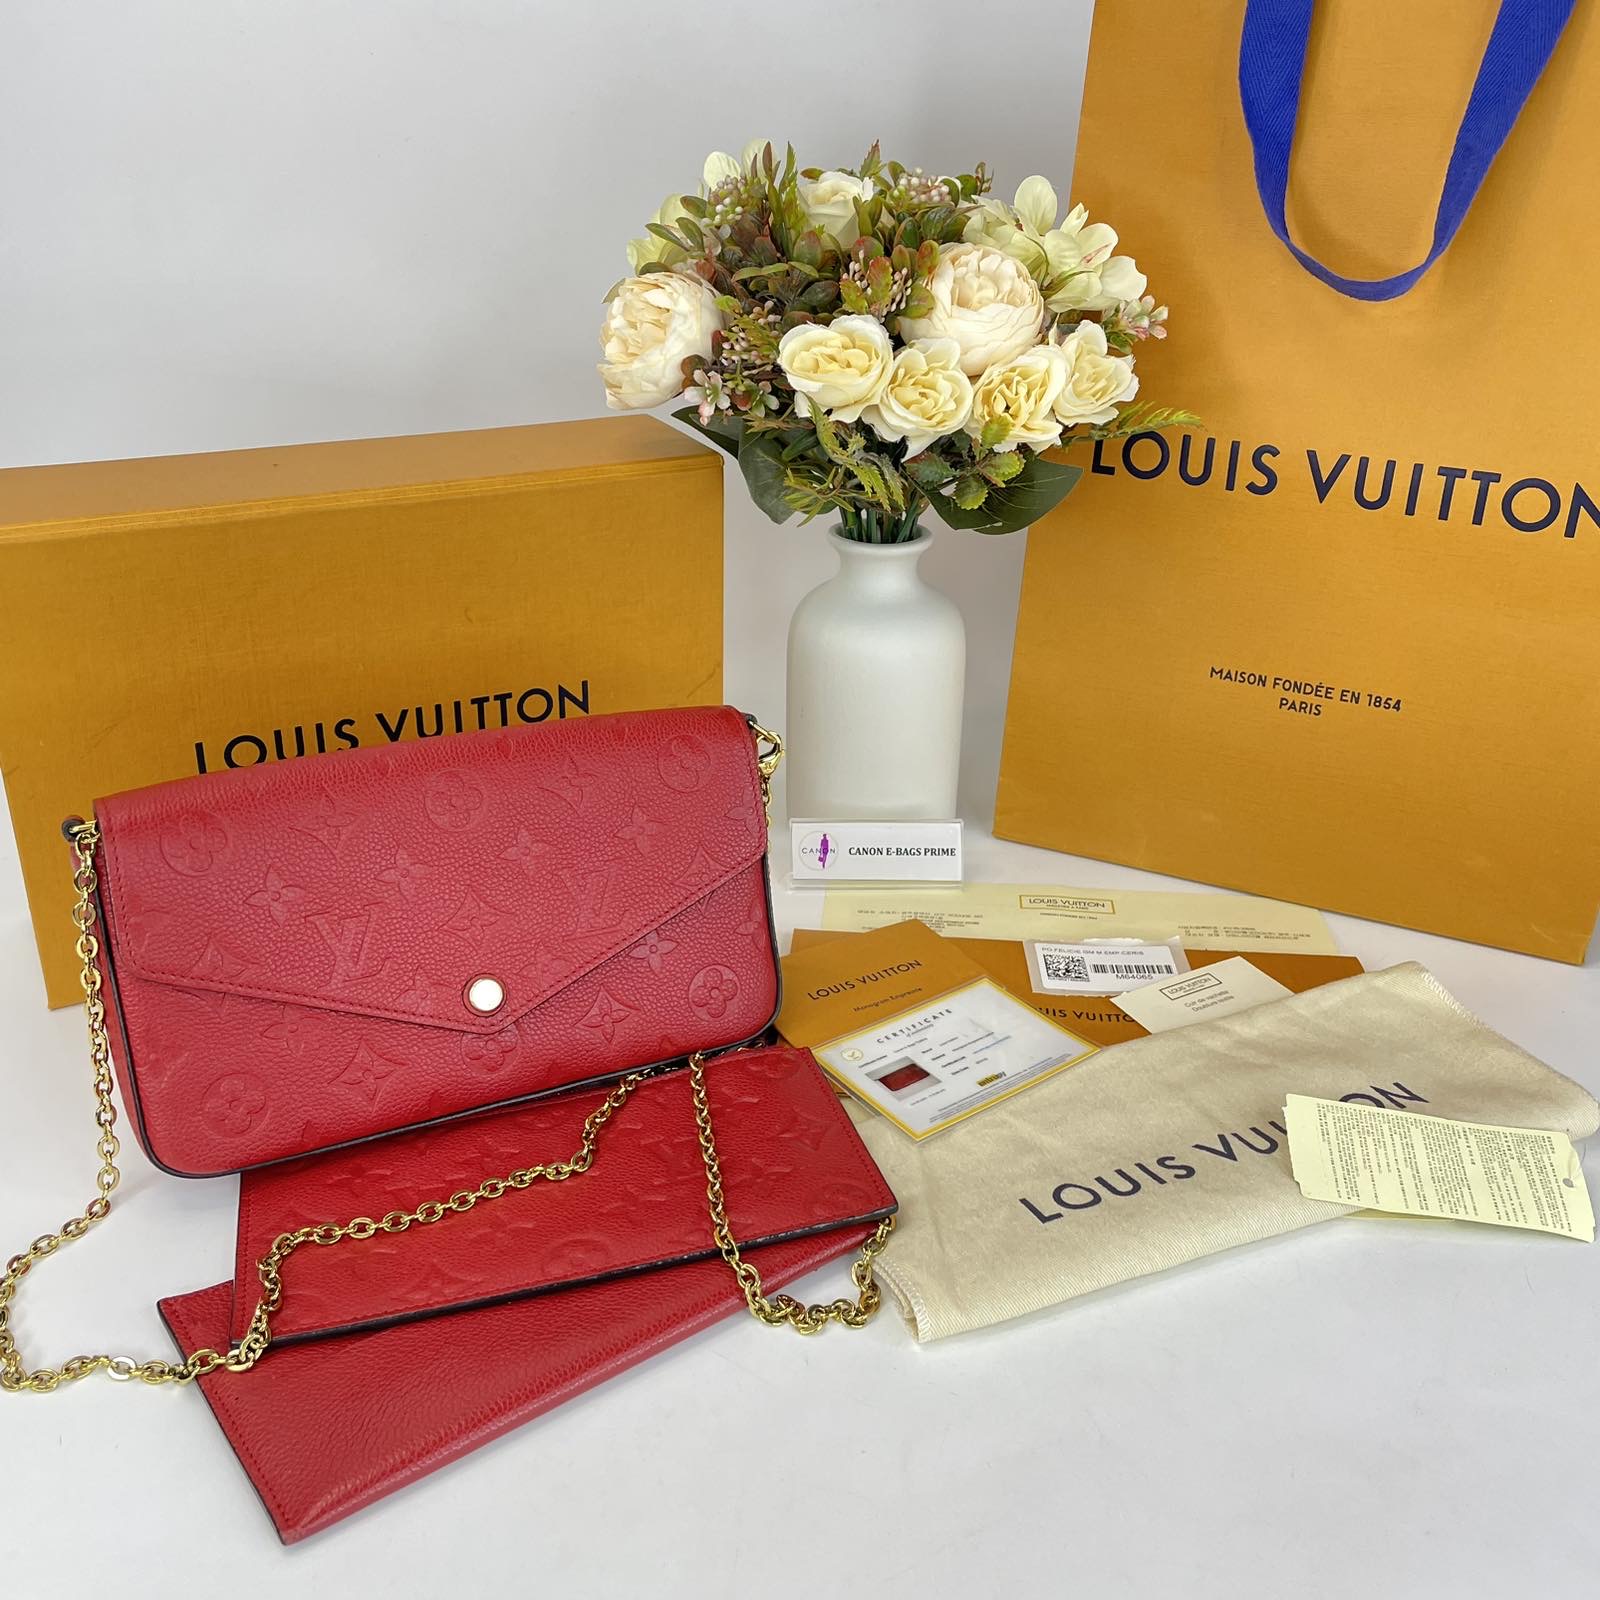 Louis Vuitton Felicia Authentic With Box And Receipt for Sale in St